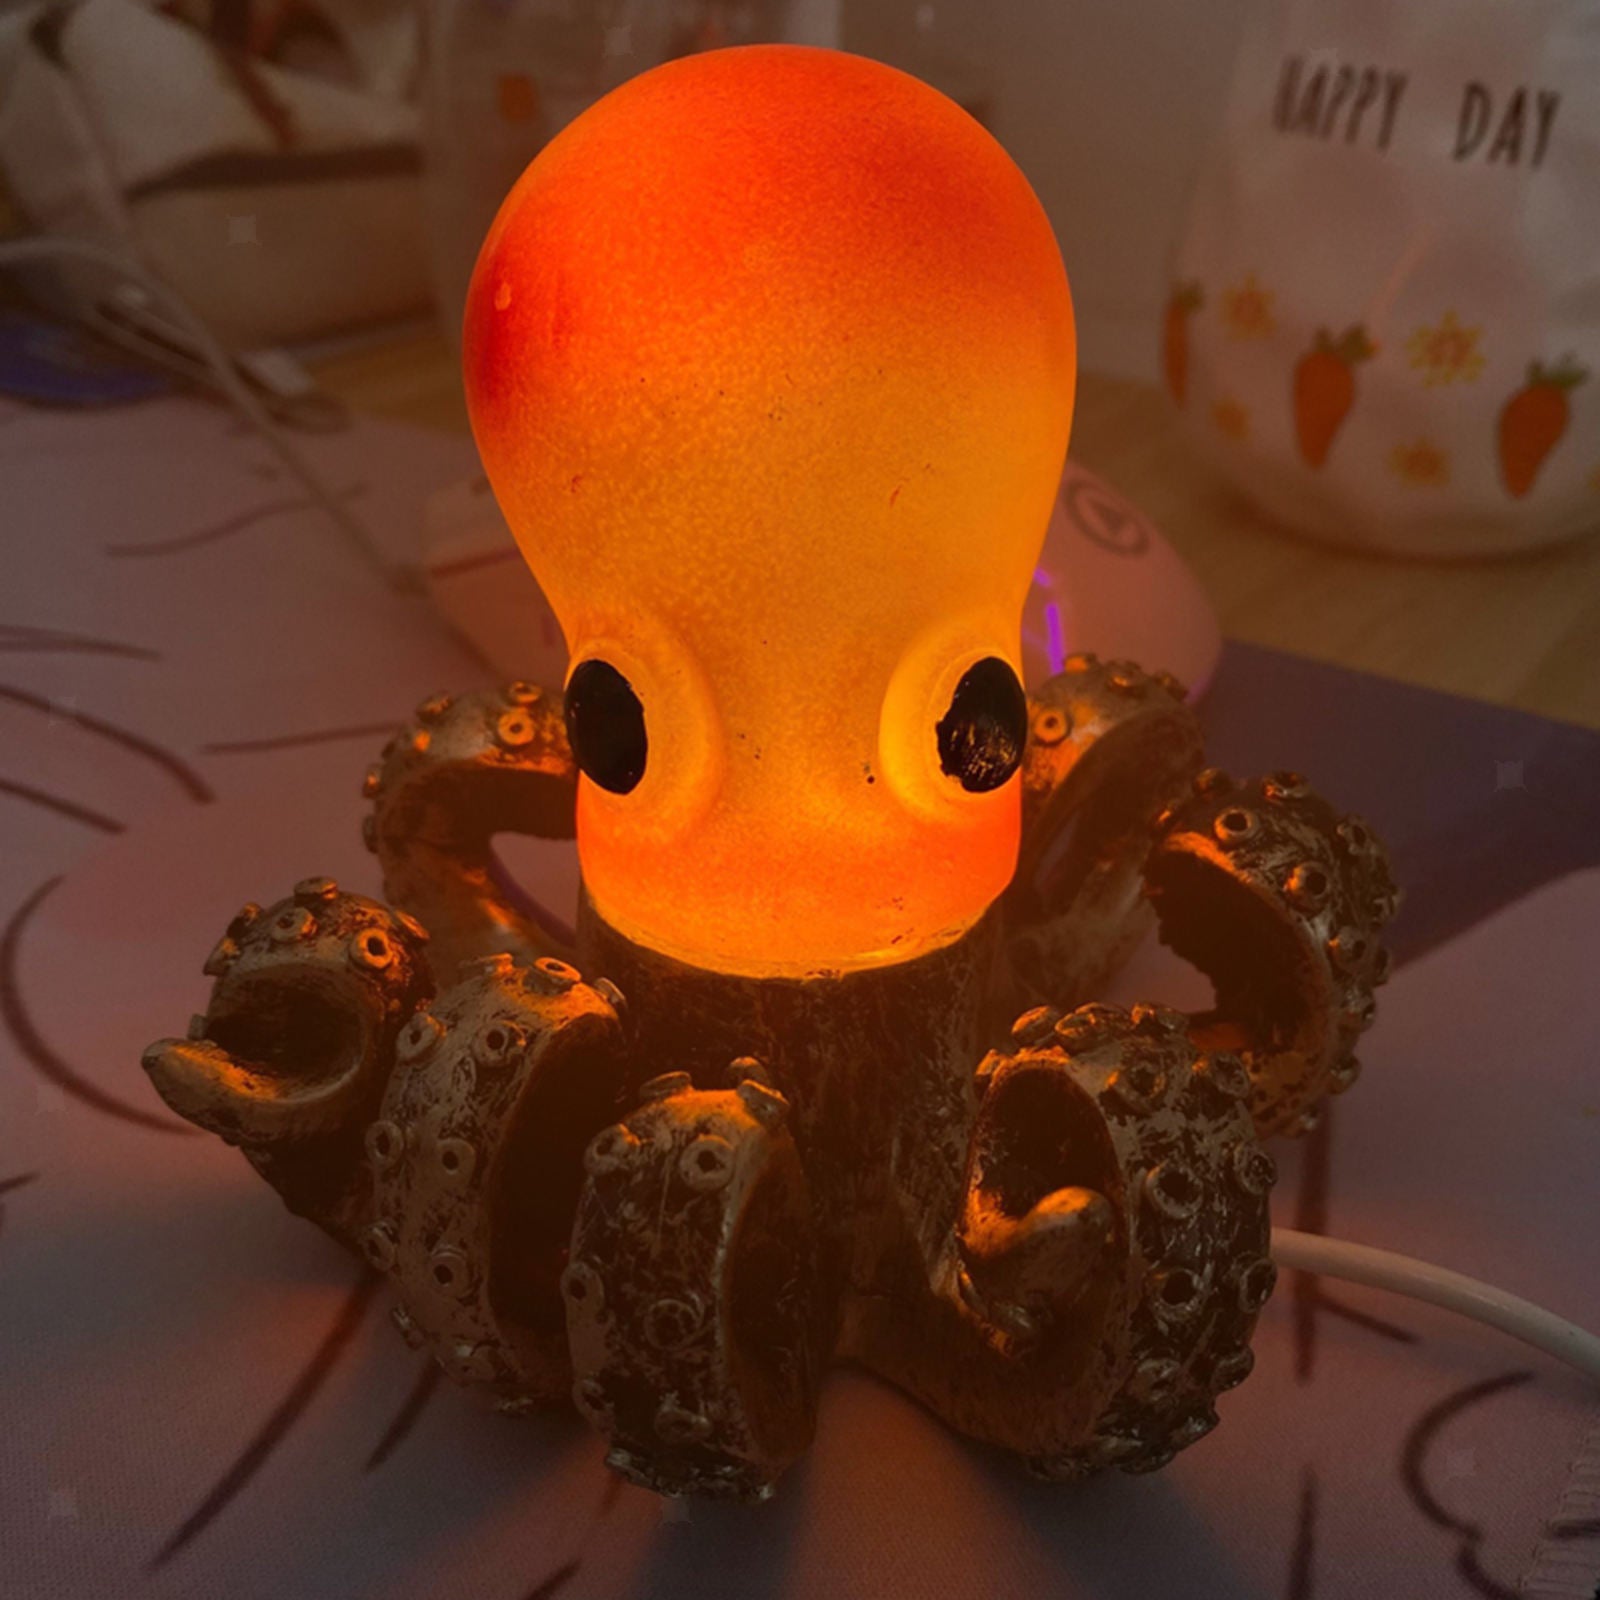 Octopus Decorative Living Room Bedside Octopus Table Lamp,Desk Lamp with USB